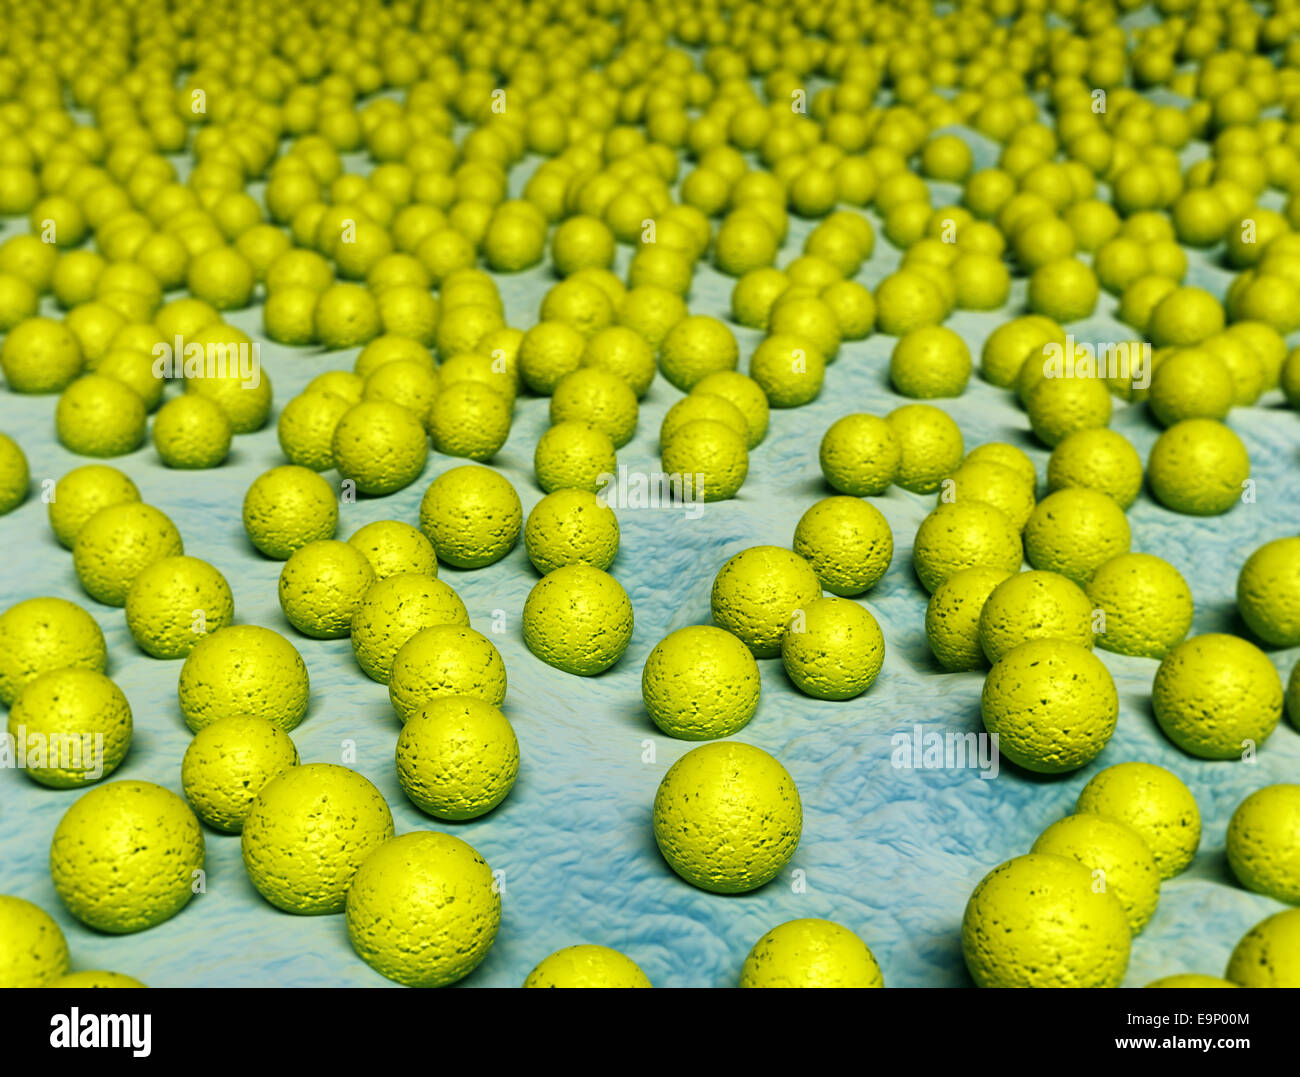 staphylococcus bacteria infection Stock Photo